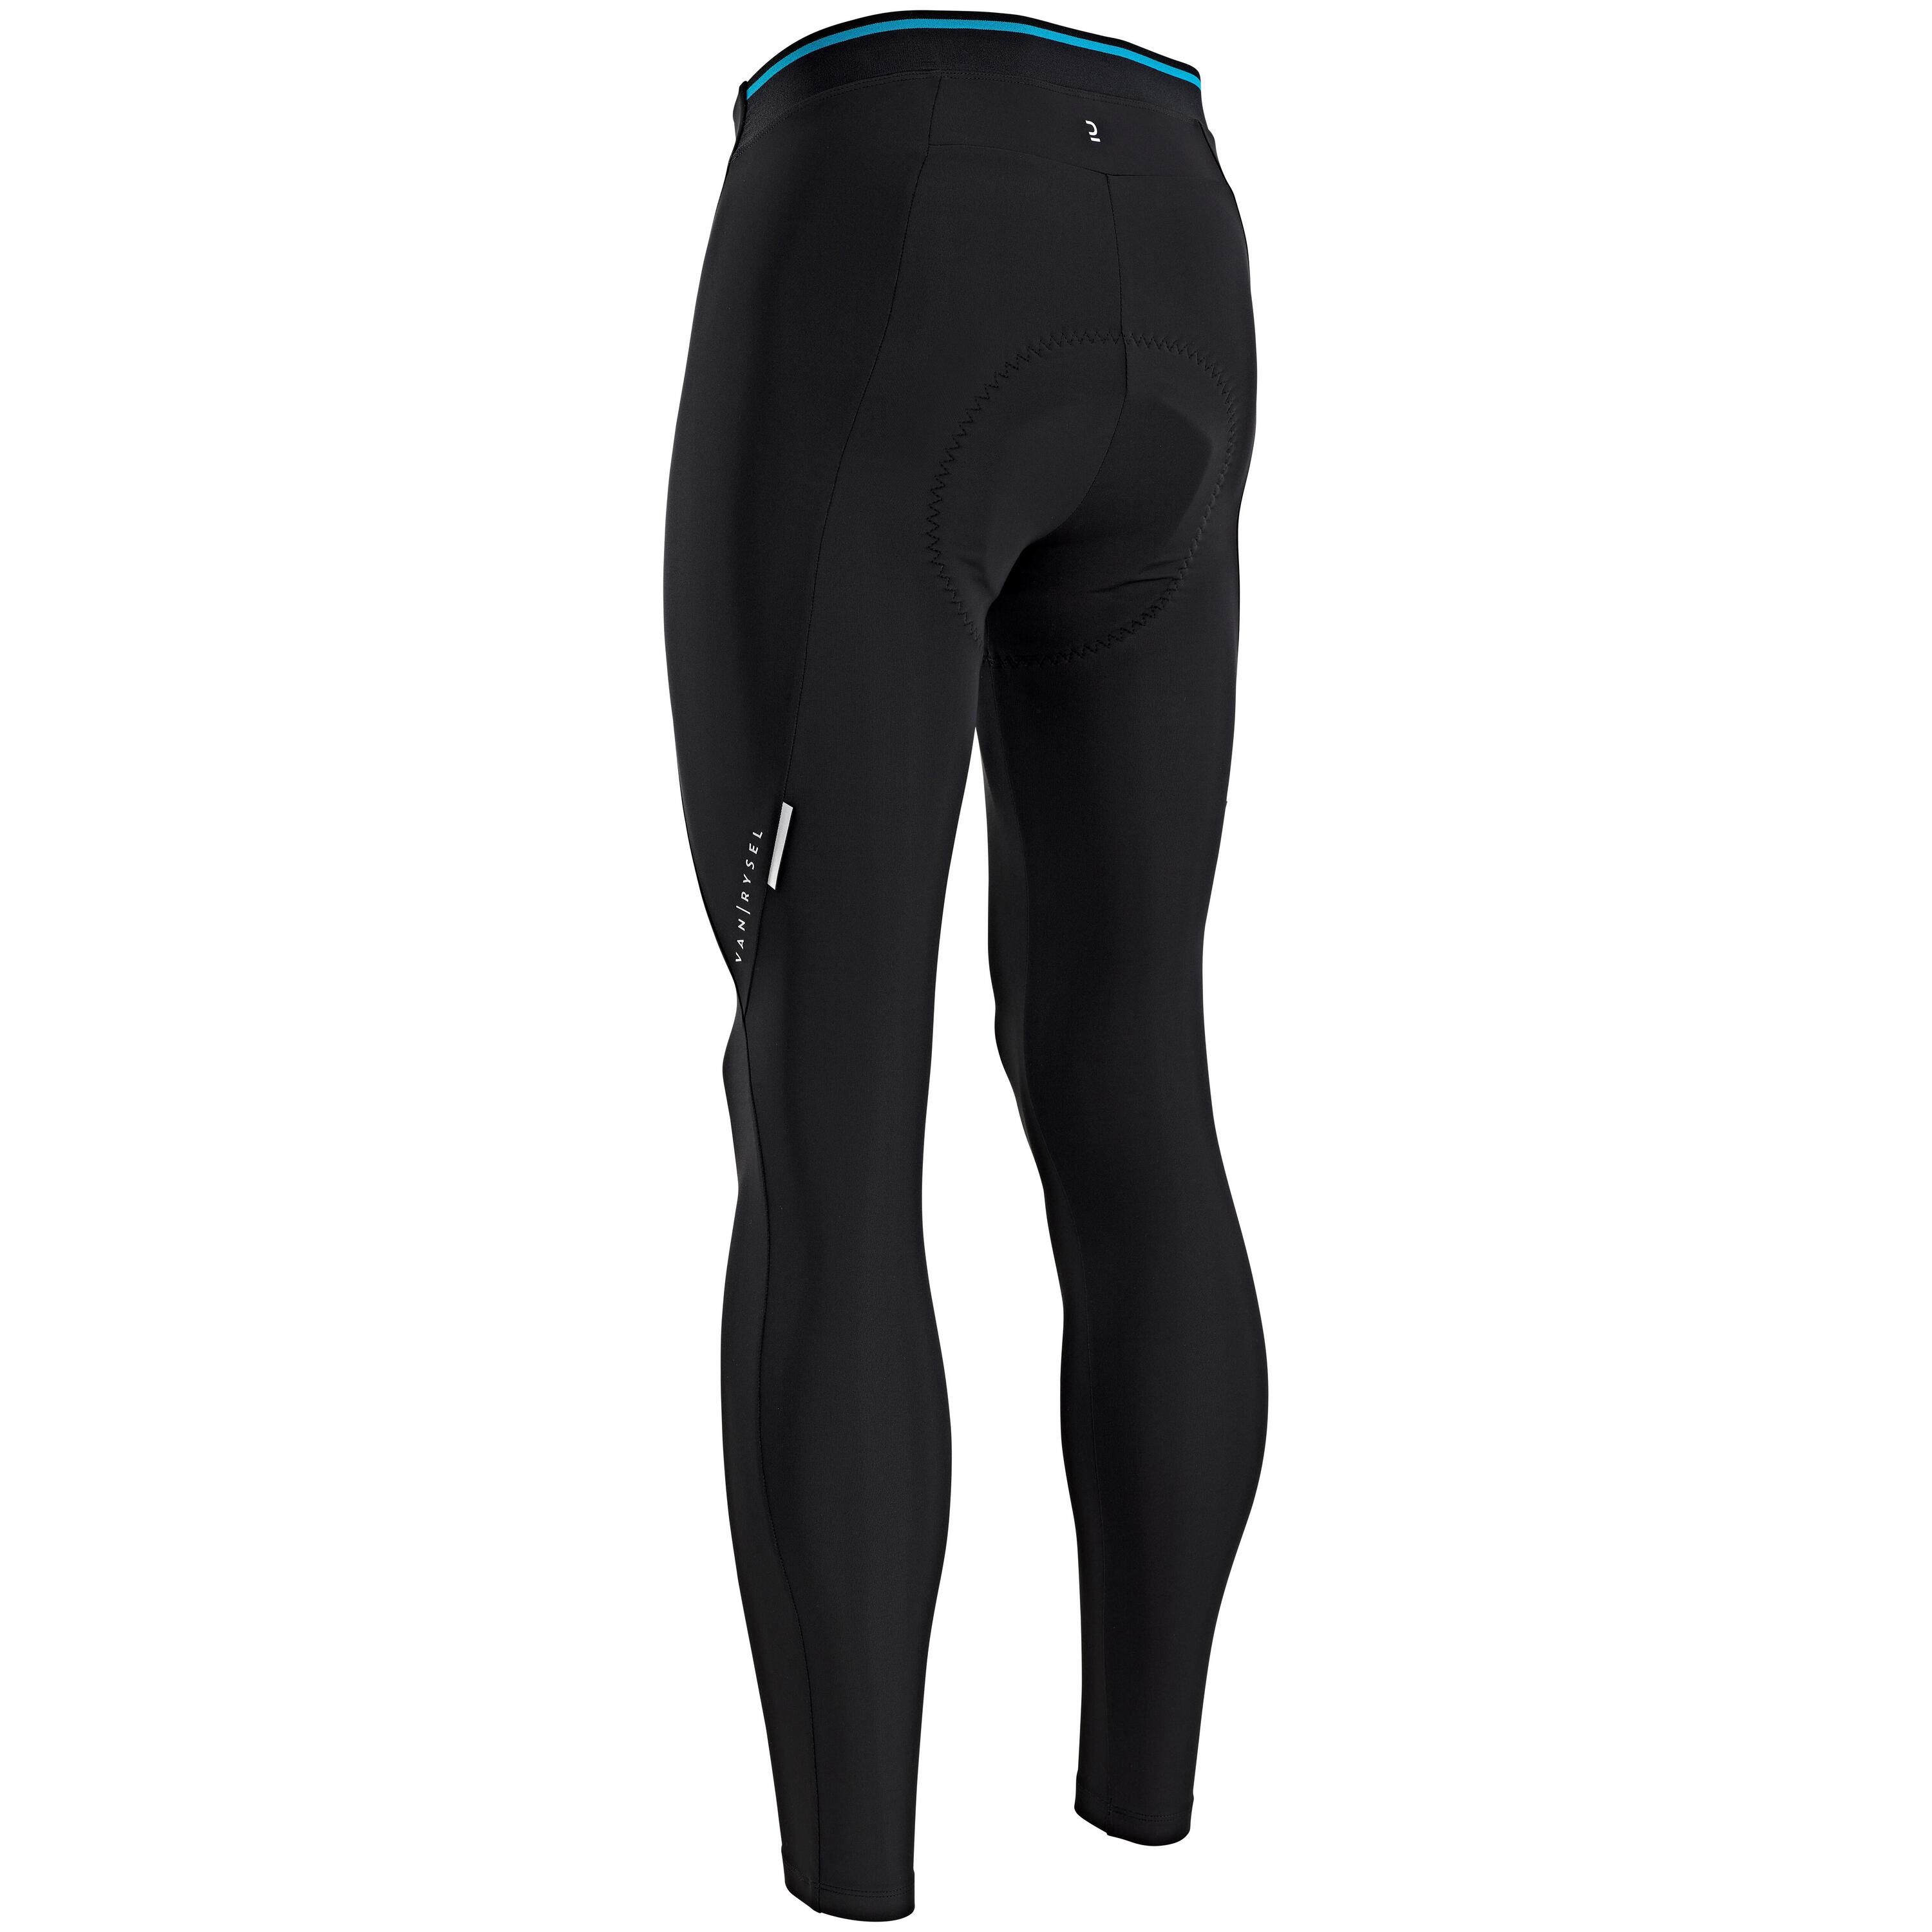 Men's Spring / Autumn Cycling Tights RC100 3/5